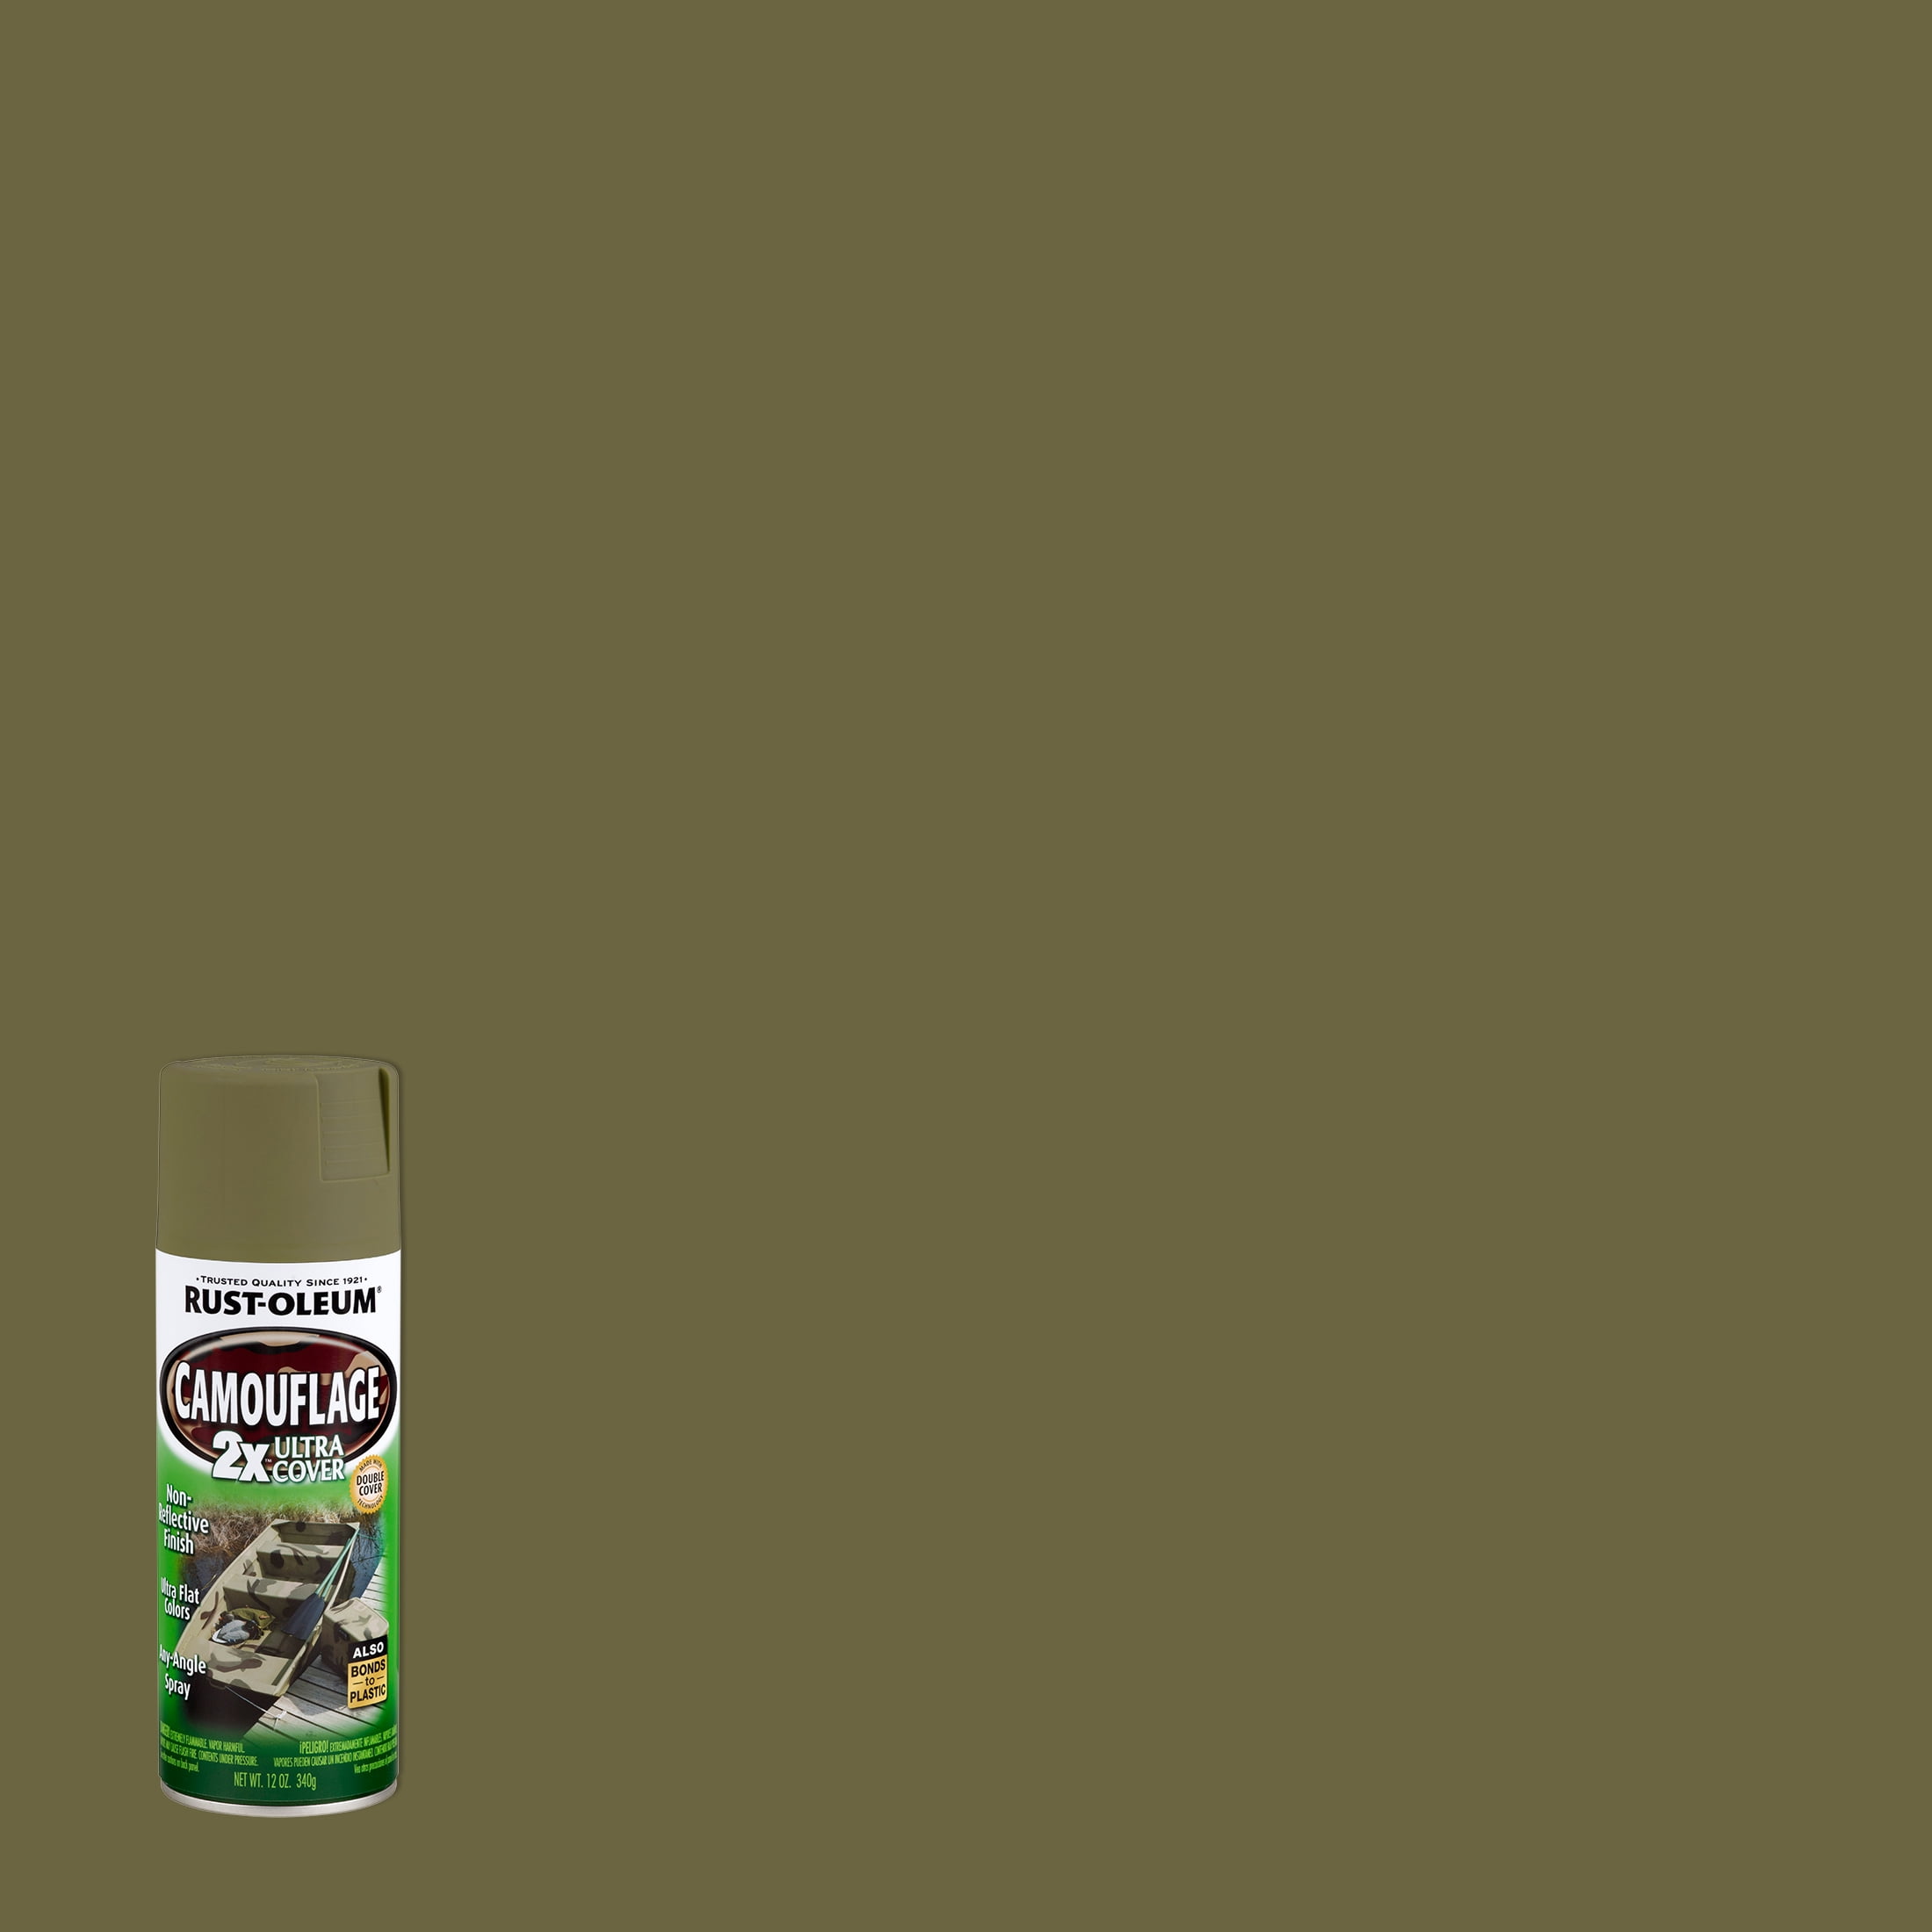 Army Green, Rust-Oleum Camouflage 2X Ultra Cover Spray Paint, 12 oz